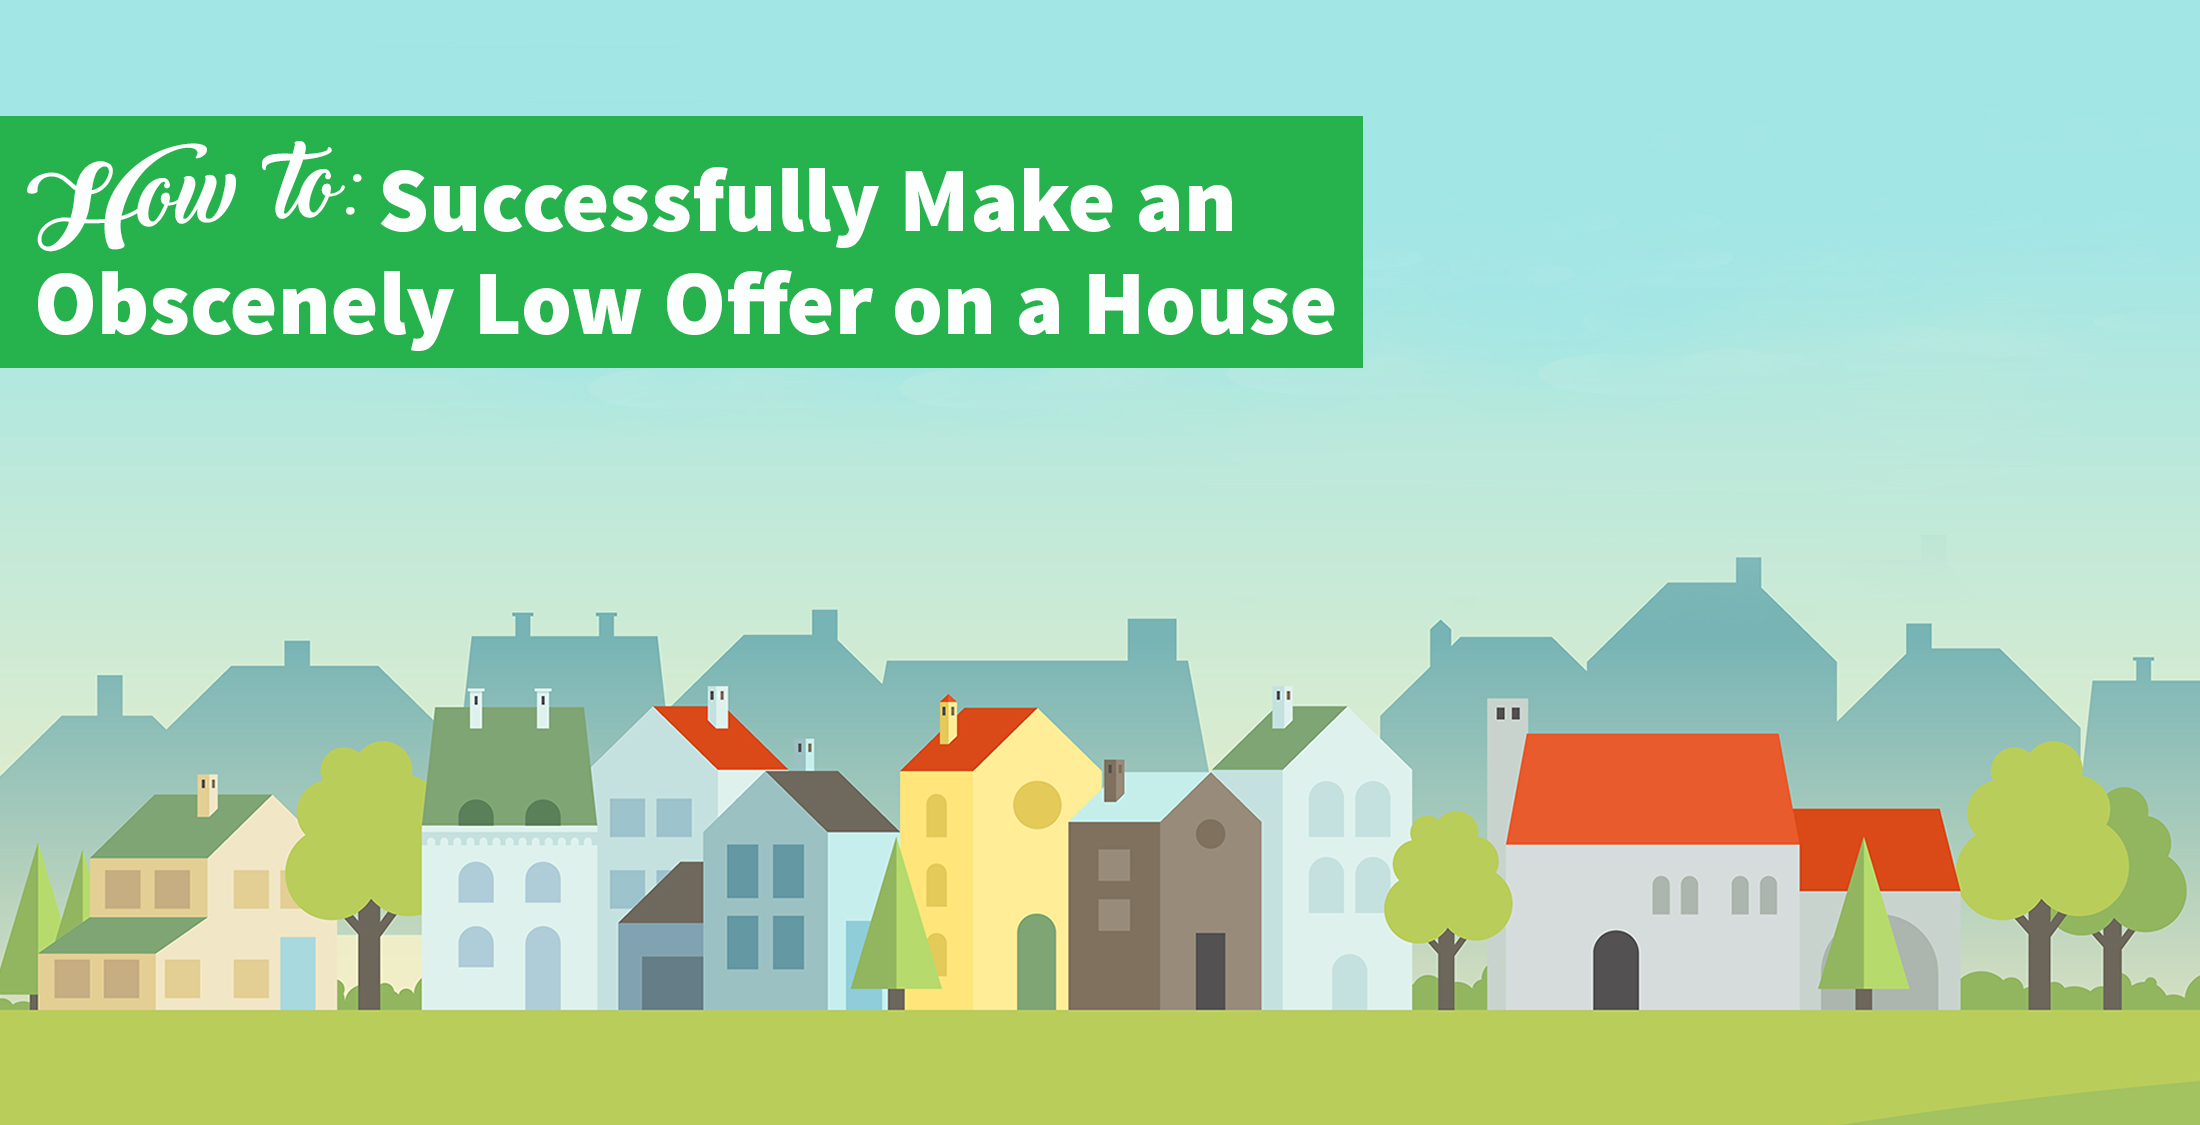 how much lower do you offer on a house